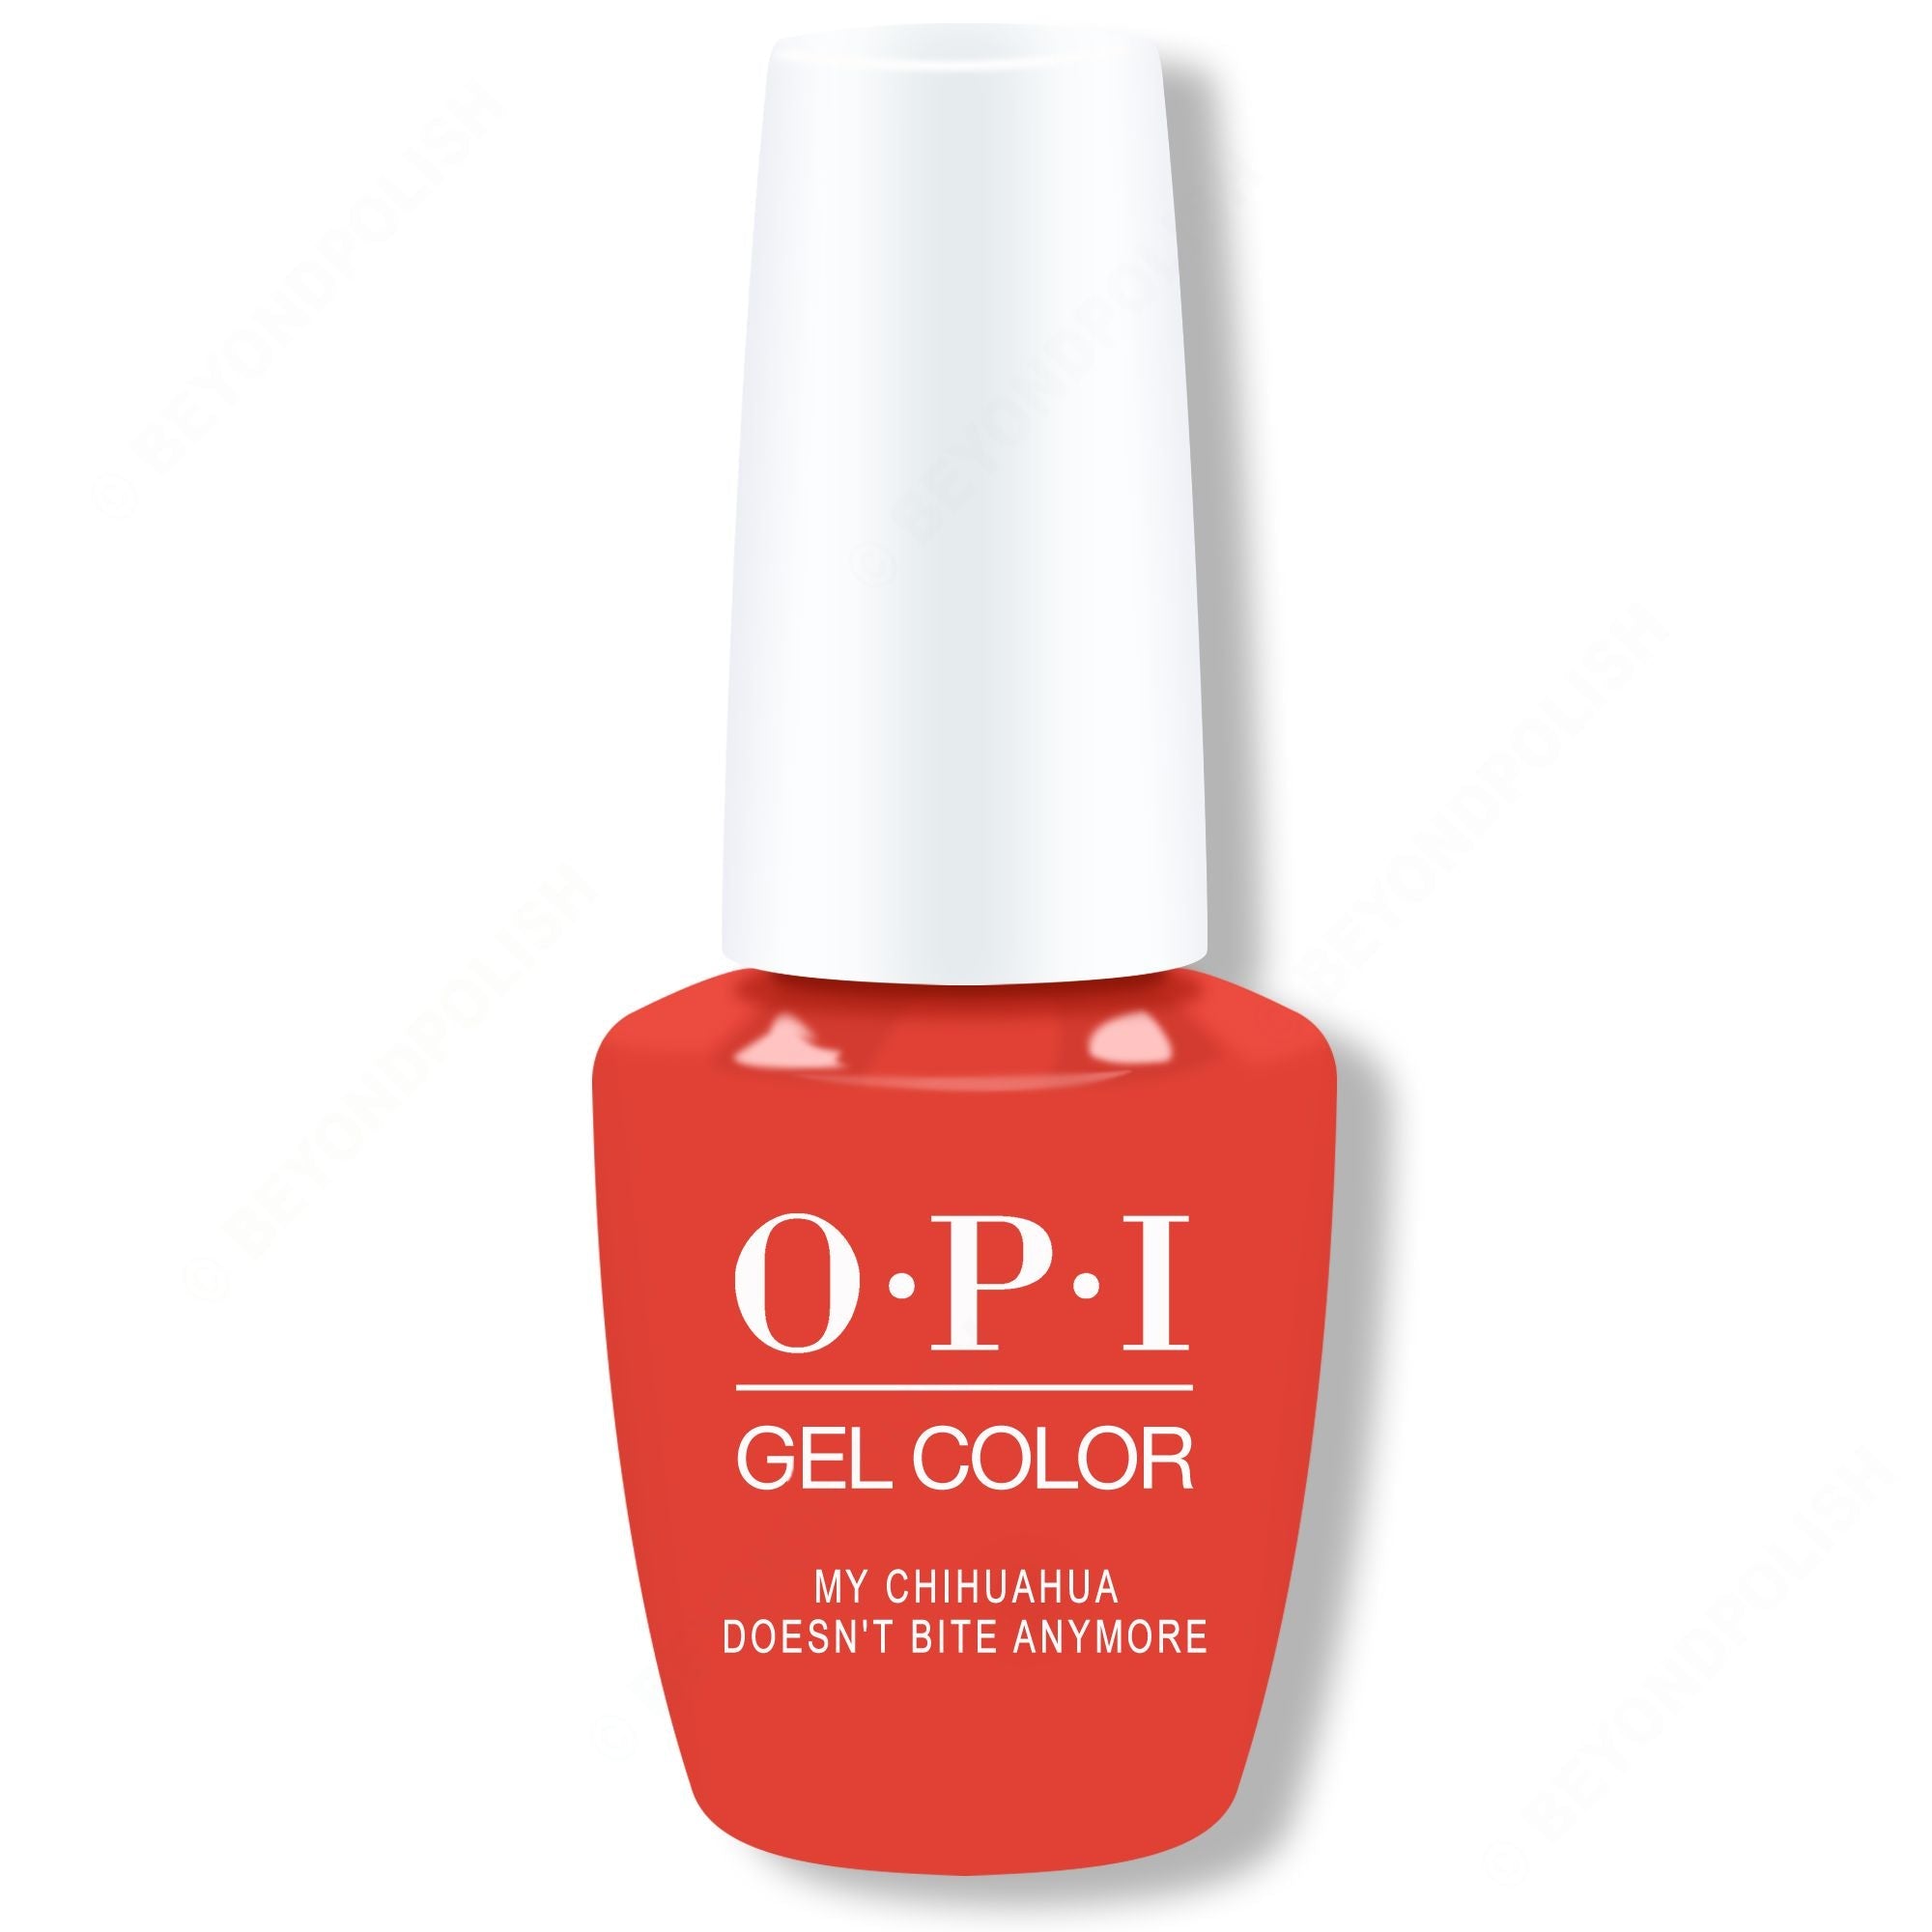 OPI Gel Color - My Chihuahua Doesn't Bite Anymore 0.5 oz - #GCM89